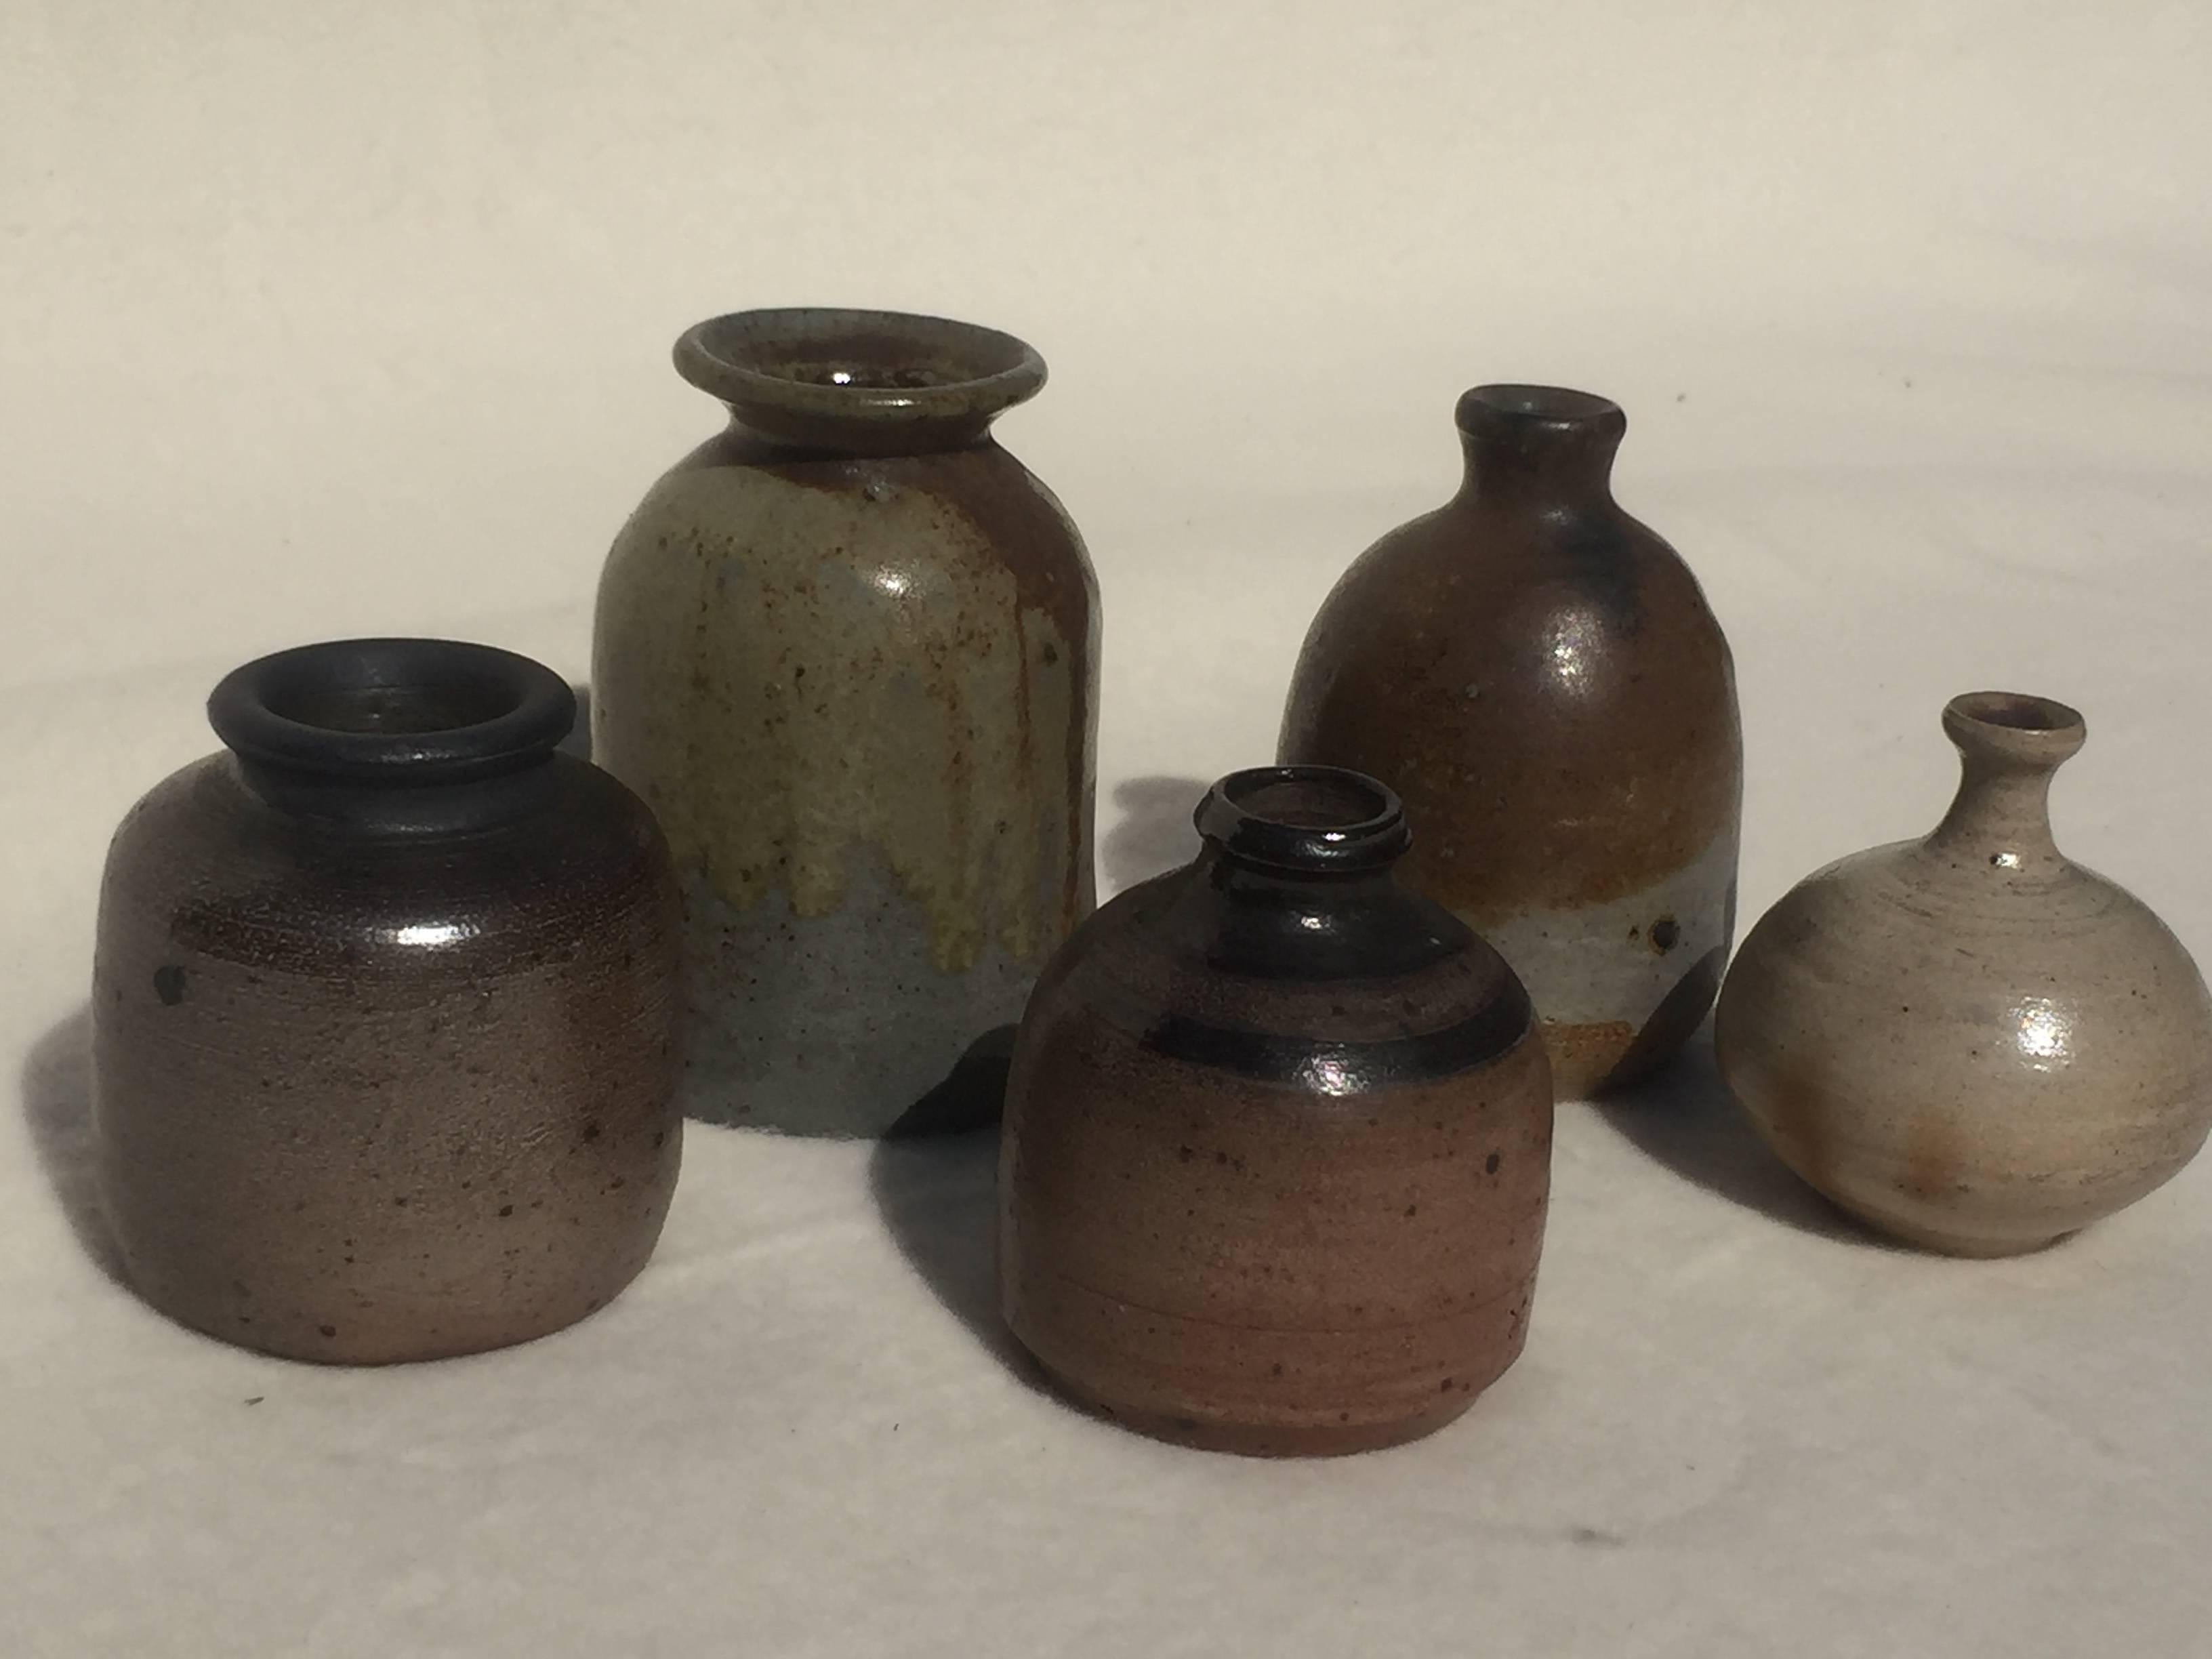 A set of five unique Miniature art pottery vases by Lilo Grinzoff-Assenmacher, Germany, 1960s. Turned and salt glazed in grey, brown, green and grey-blue with a mother-of-pearl shimmer.
Measures: The largest one is 3.9''/ 10 cm high, Ø 2.9''/ 7.4